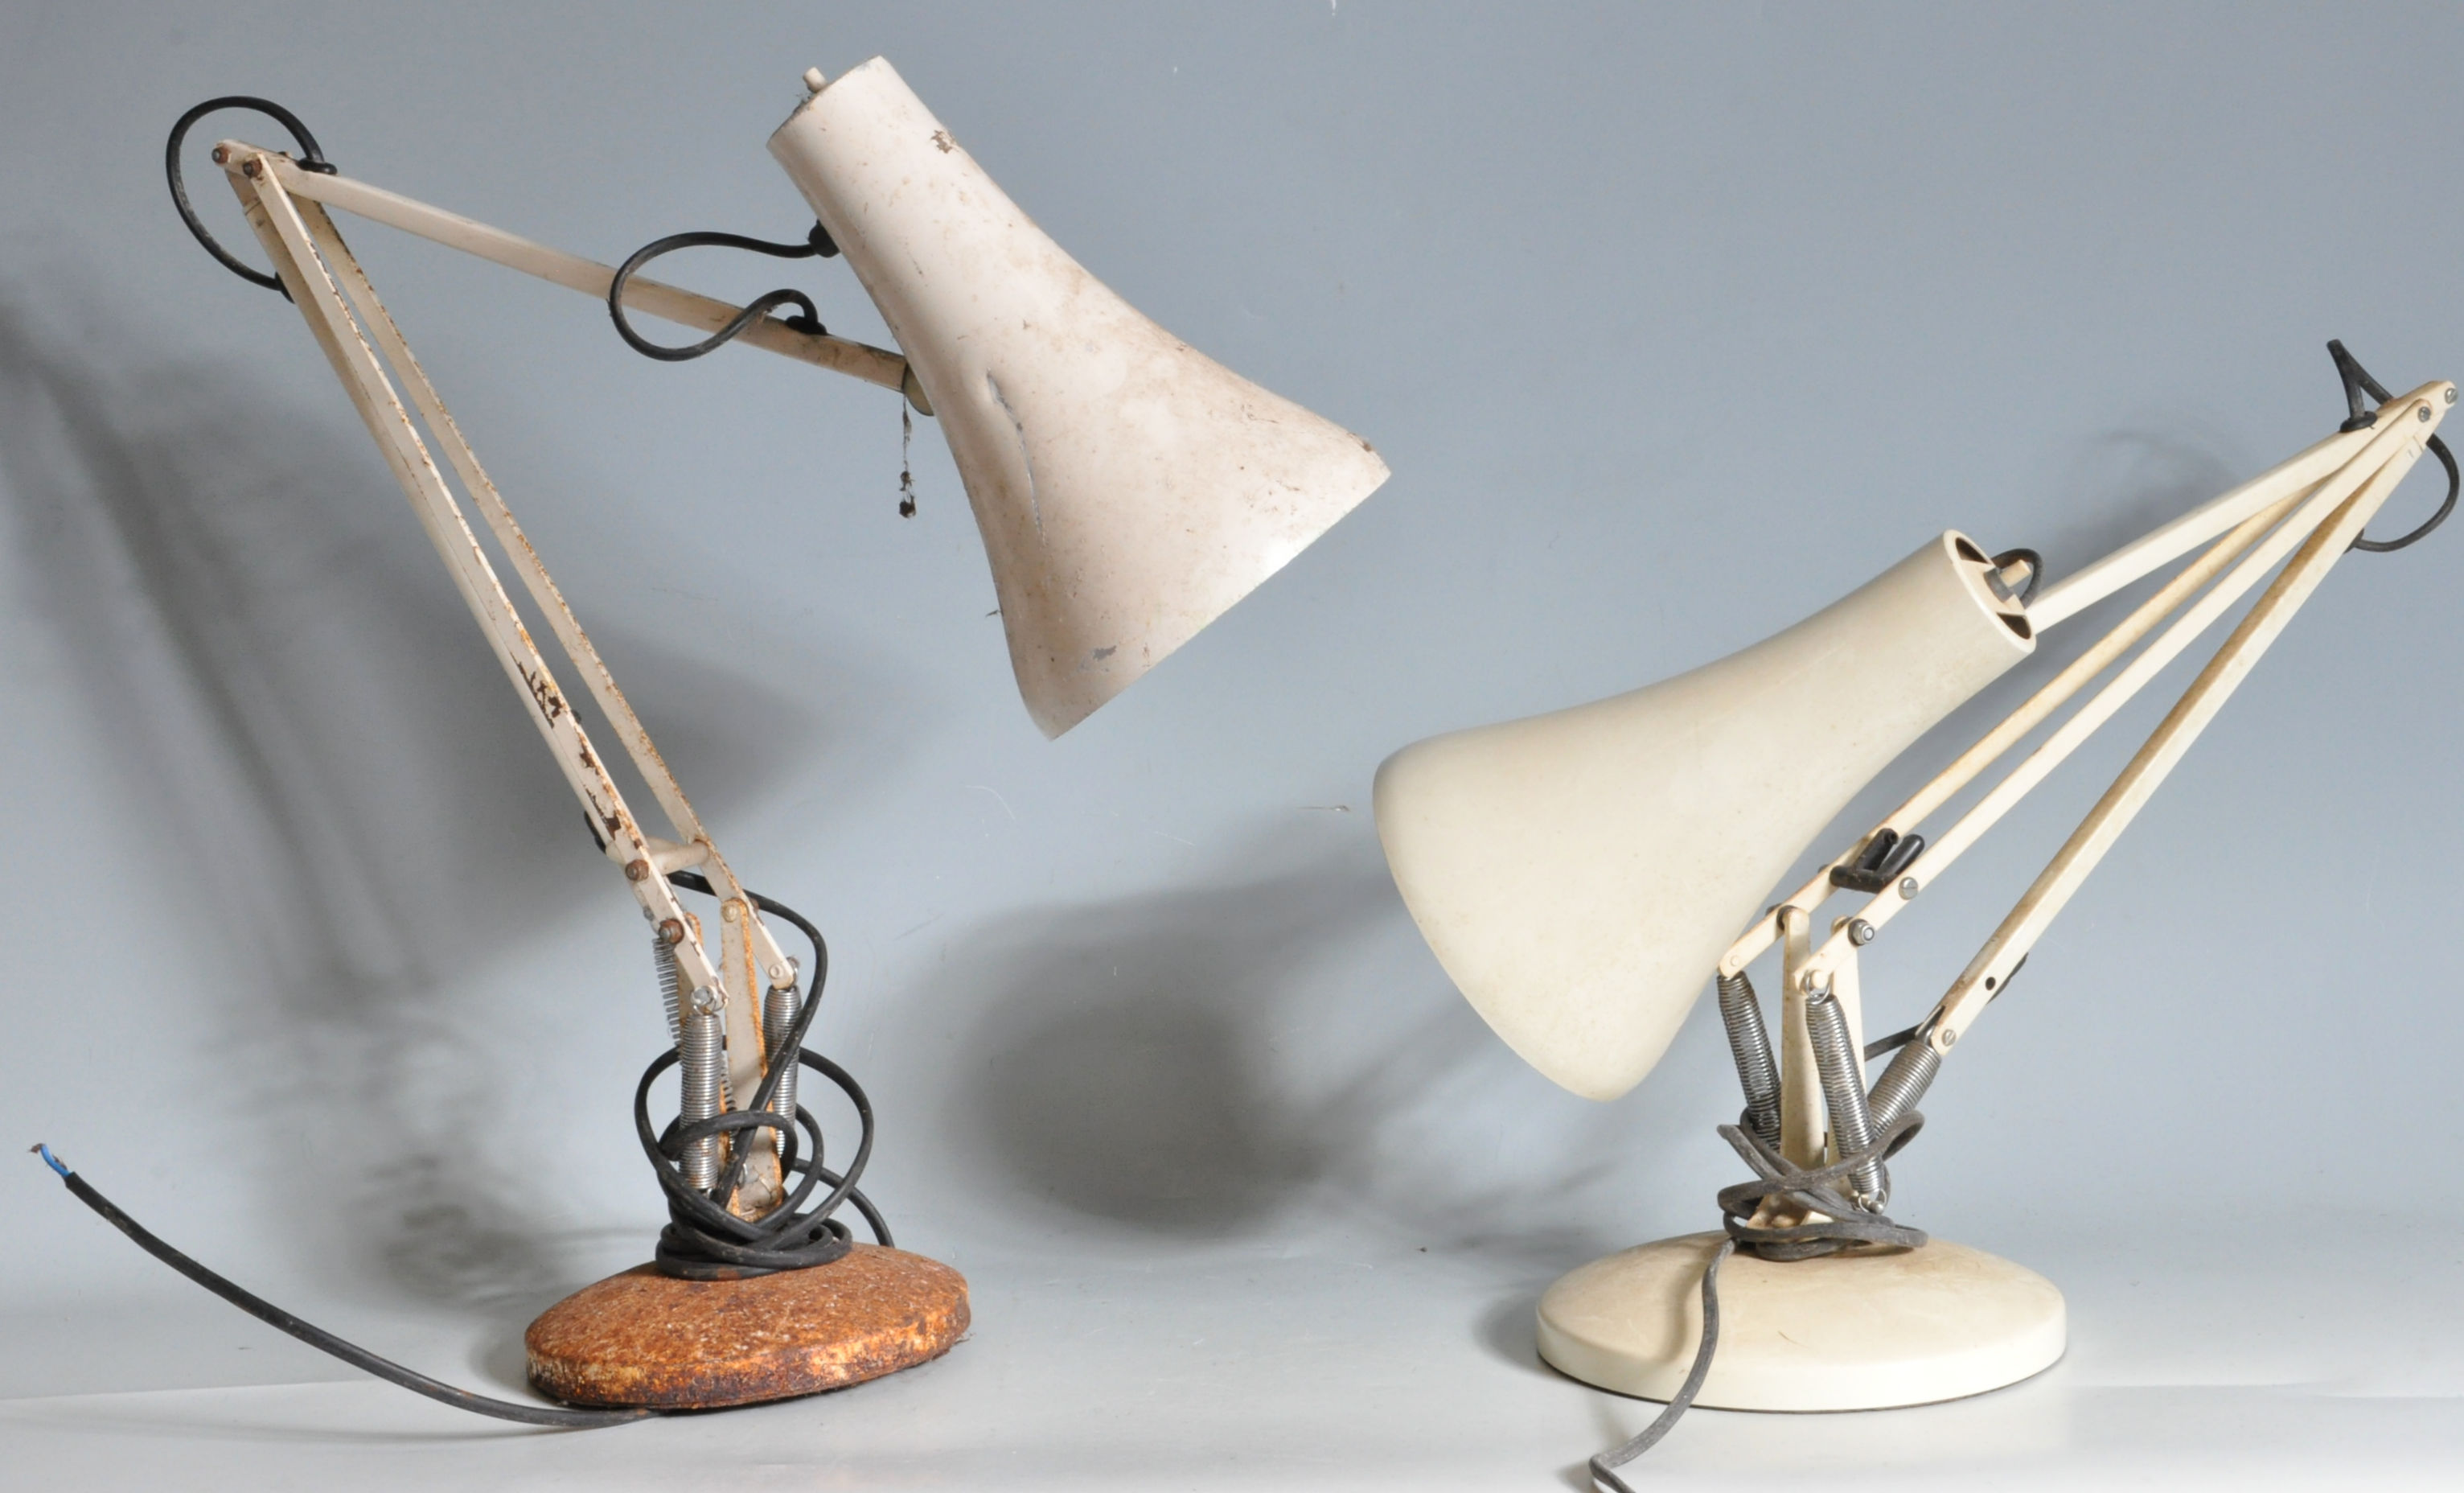 TWO VINTAGE HERBERT TERRY ANGLEPOISE DESK LAMPS